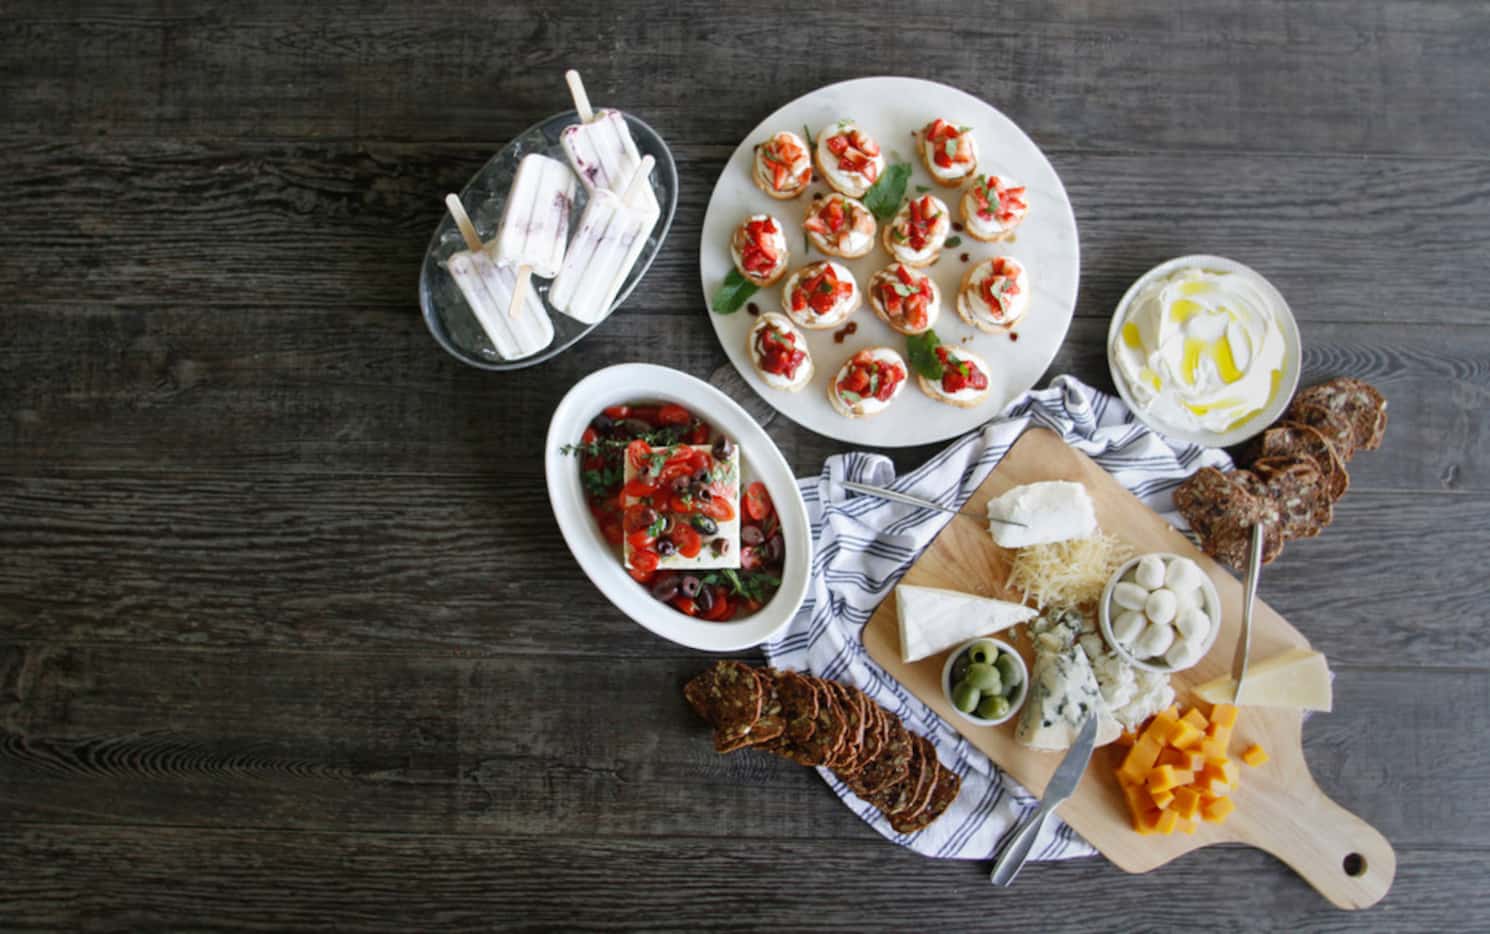 Throw a cheese party with crostinis, baked feta, labneh and more.